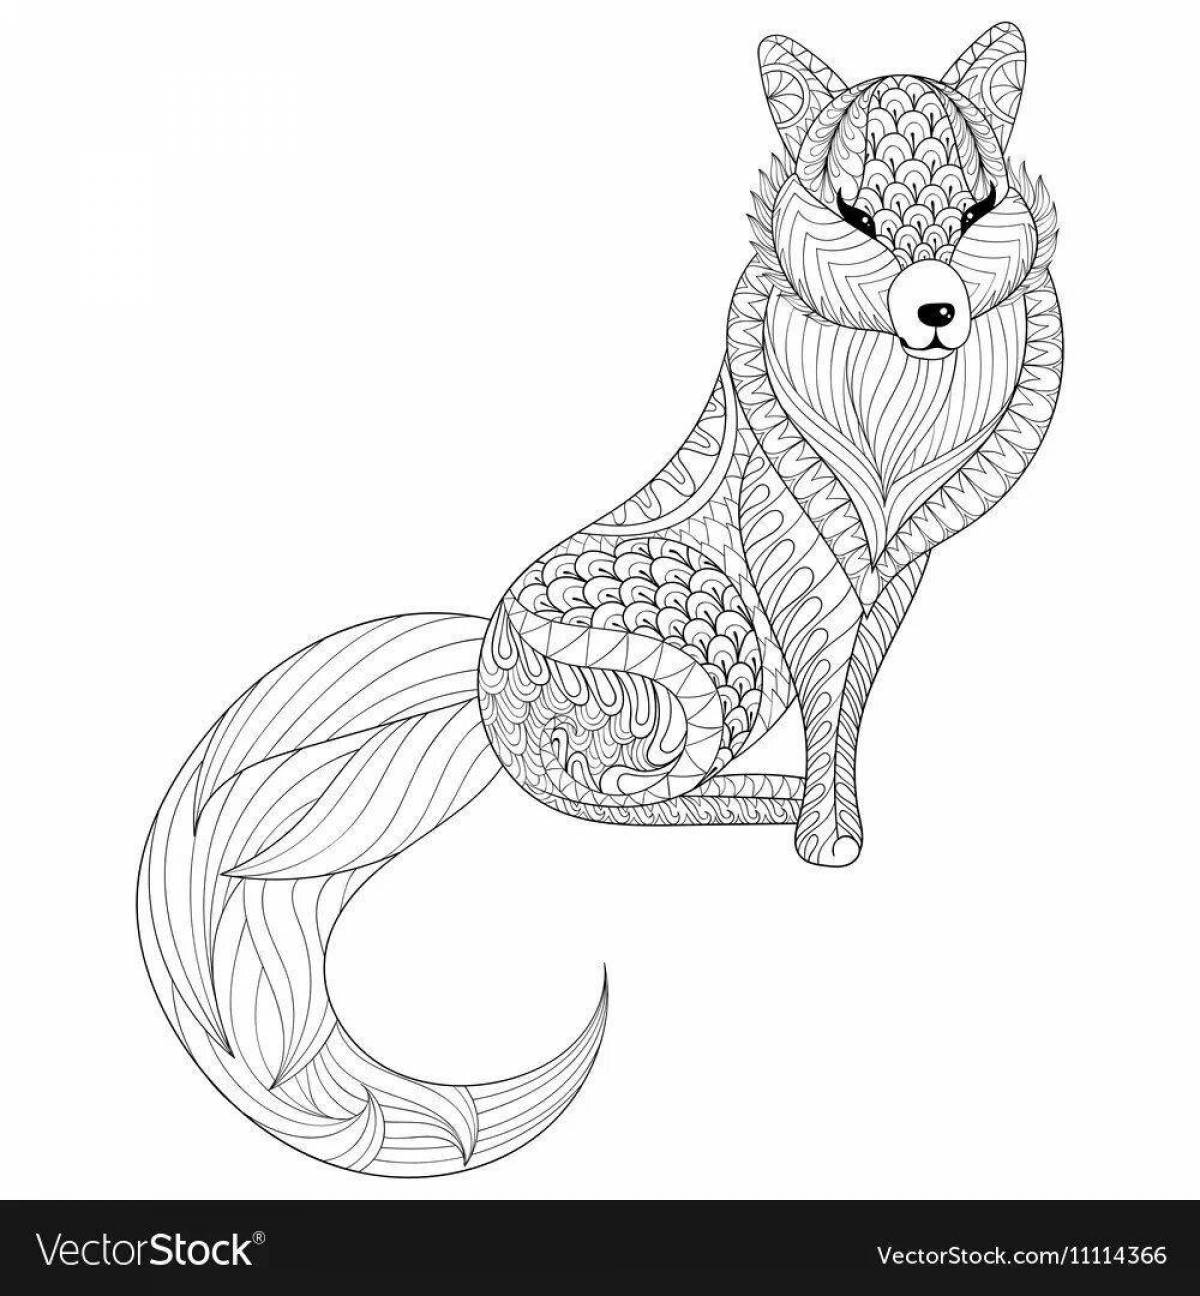 Radiant coloring page fox complex